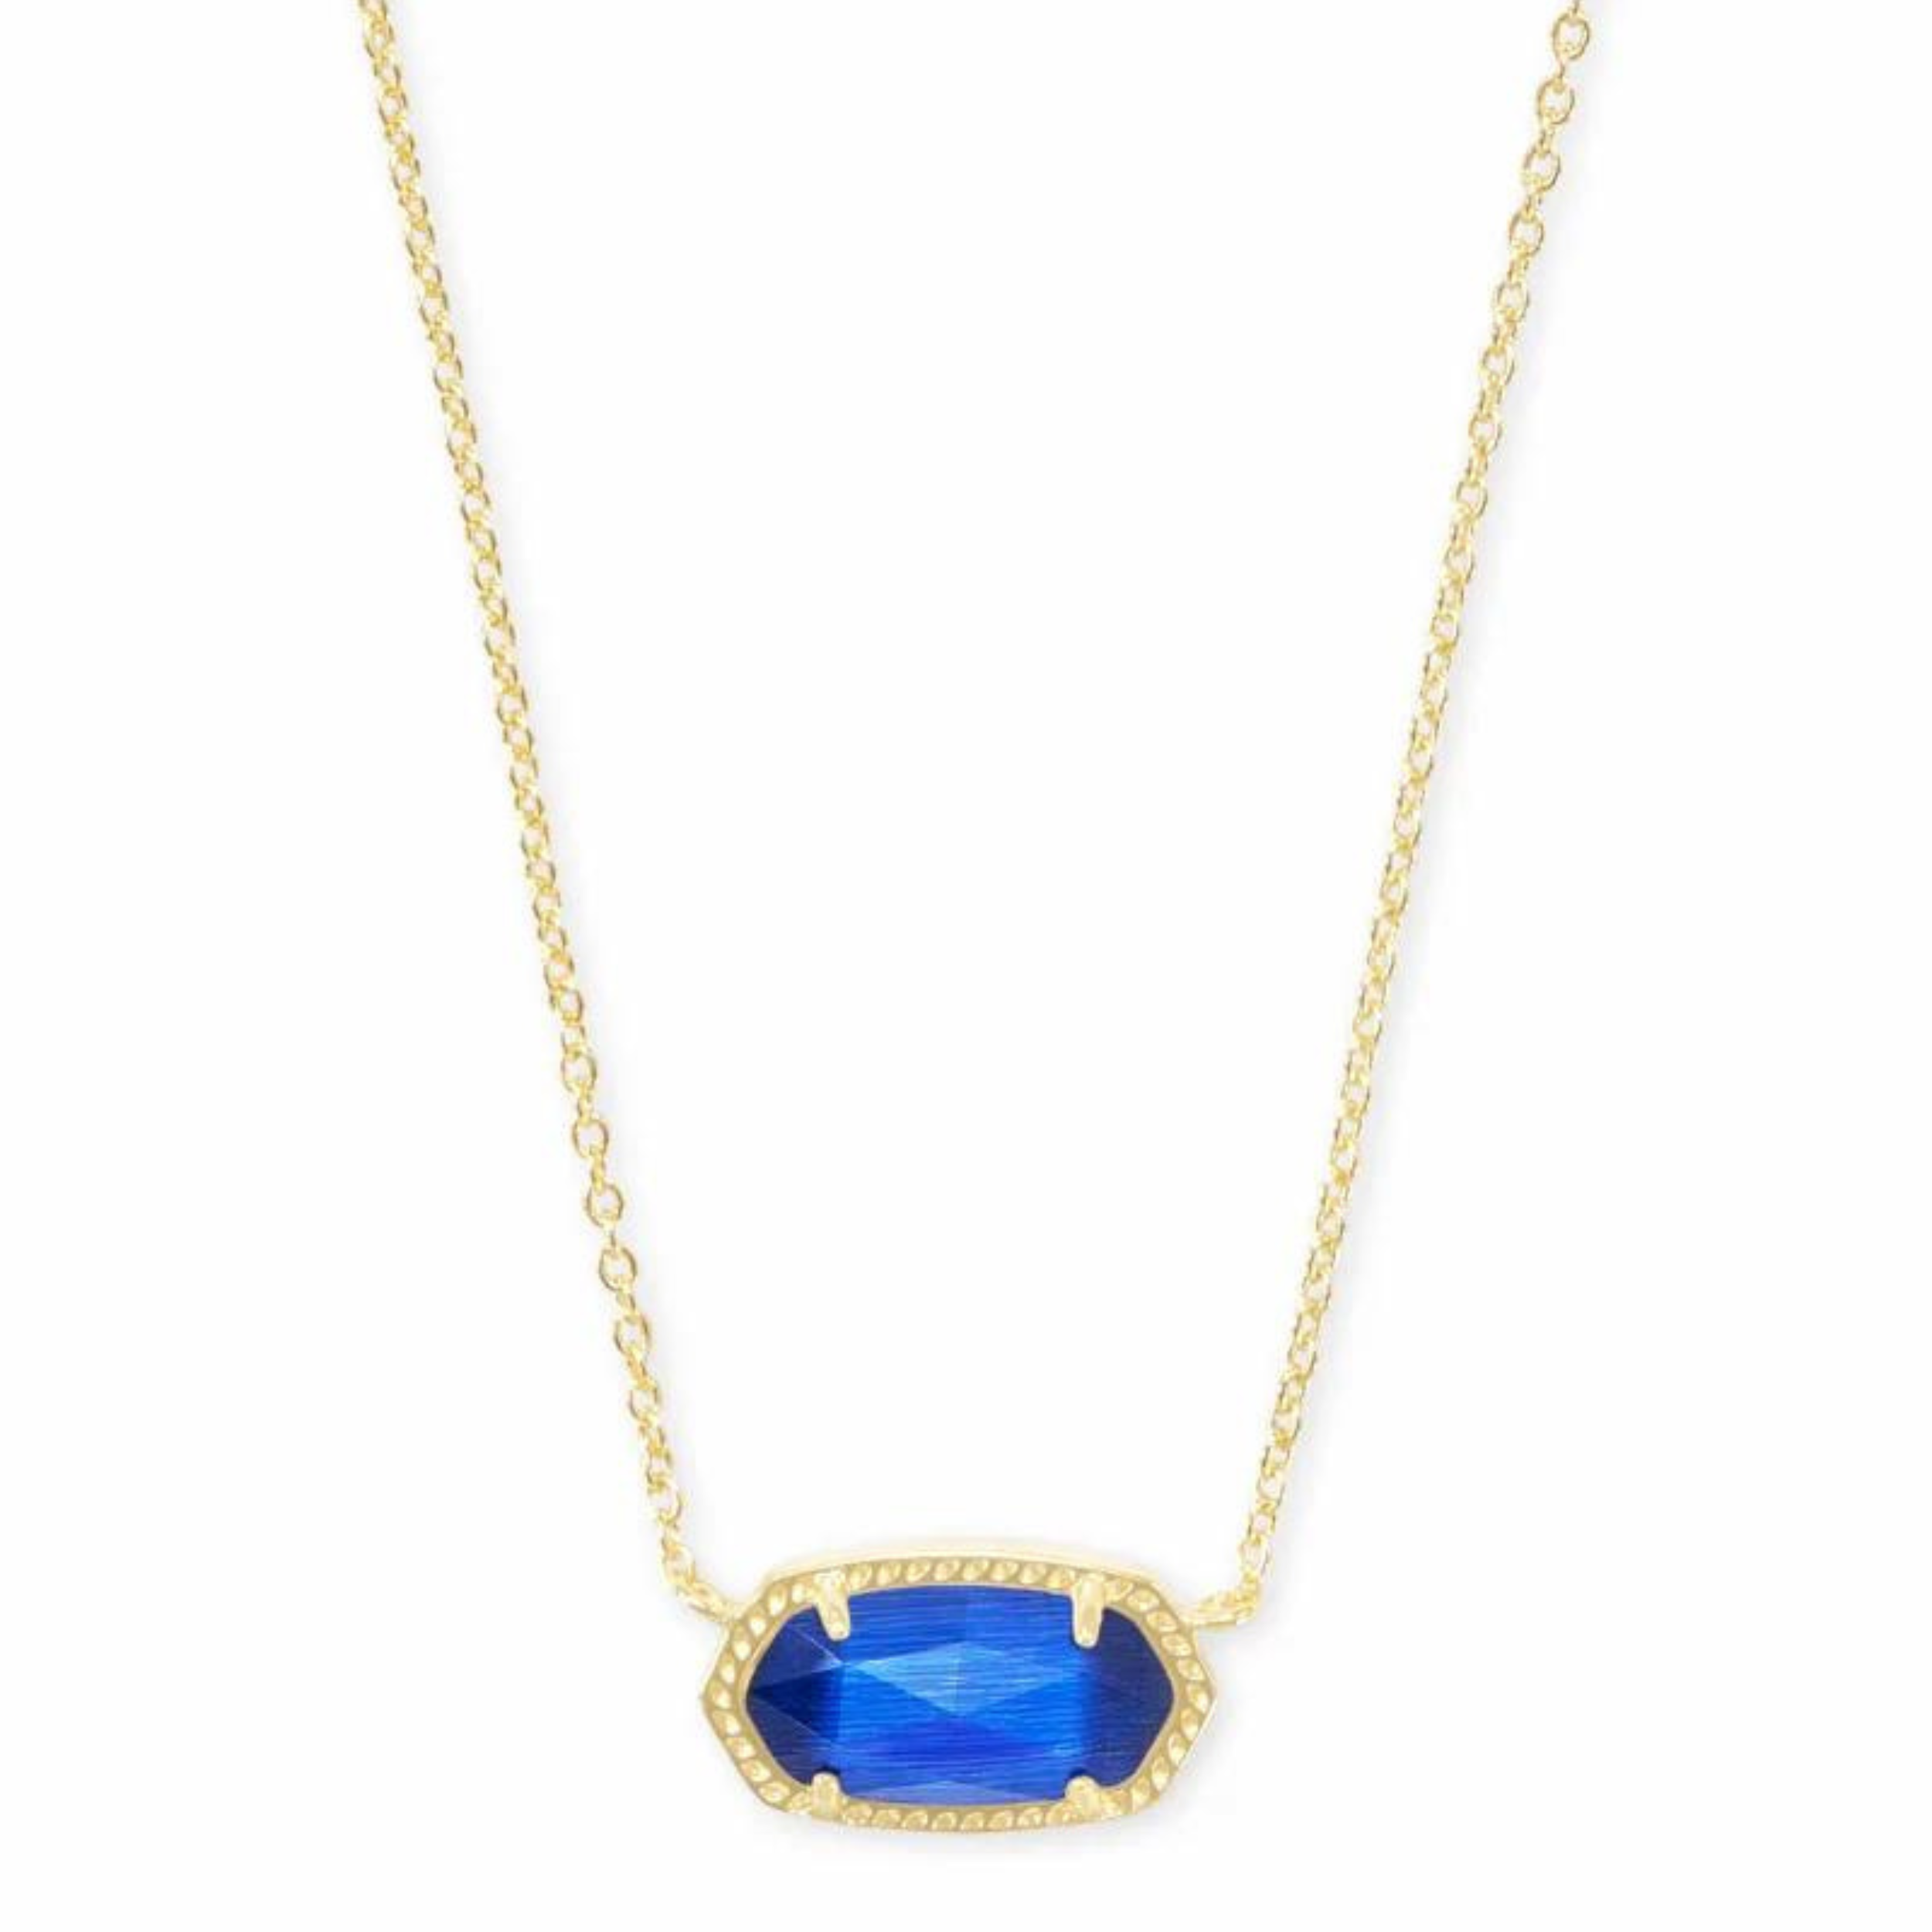 Gold necklace with cobalt cats eye pendant, pictured on a white background.